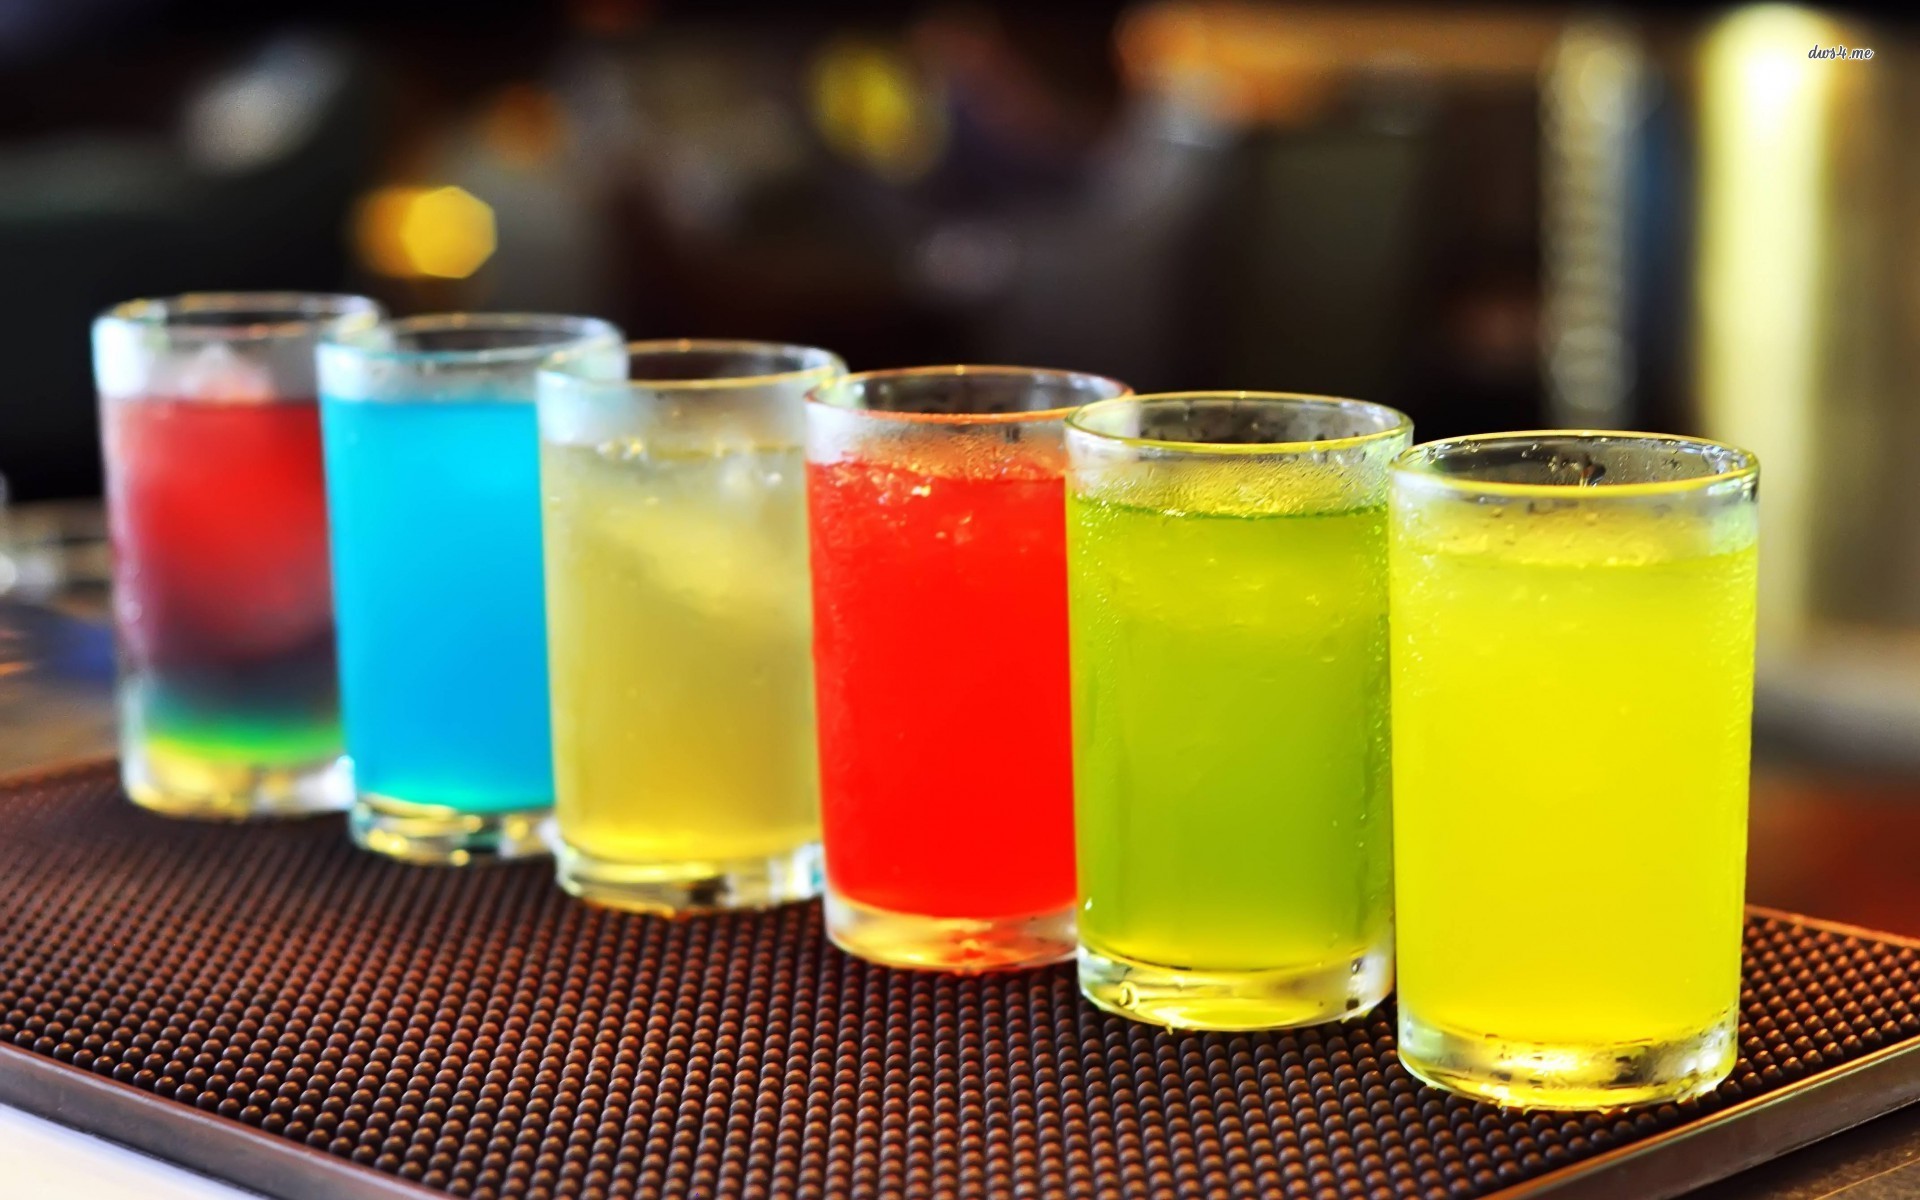 Shots. We’re not quite sure what’s in them, we don’t care, they just need to be colourful.